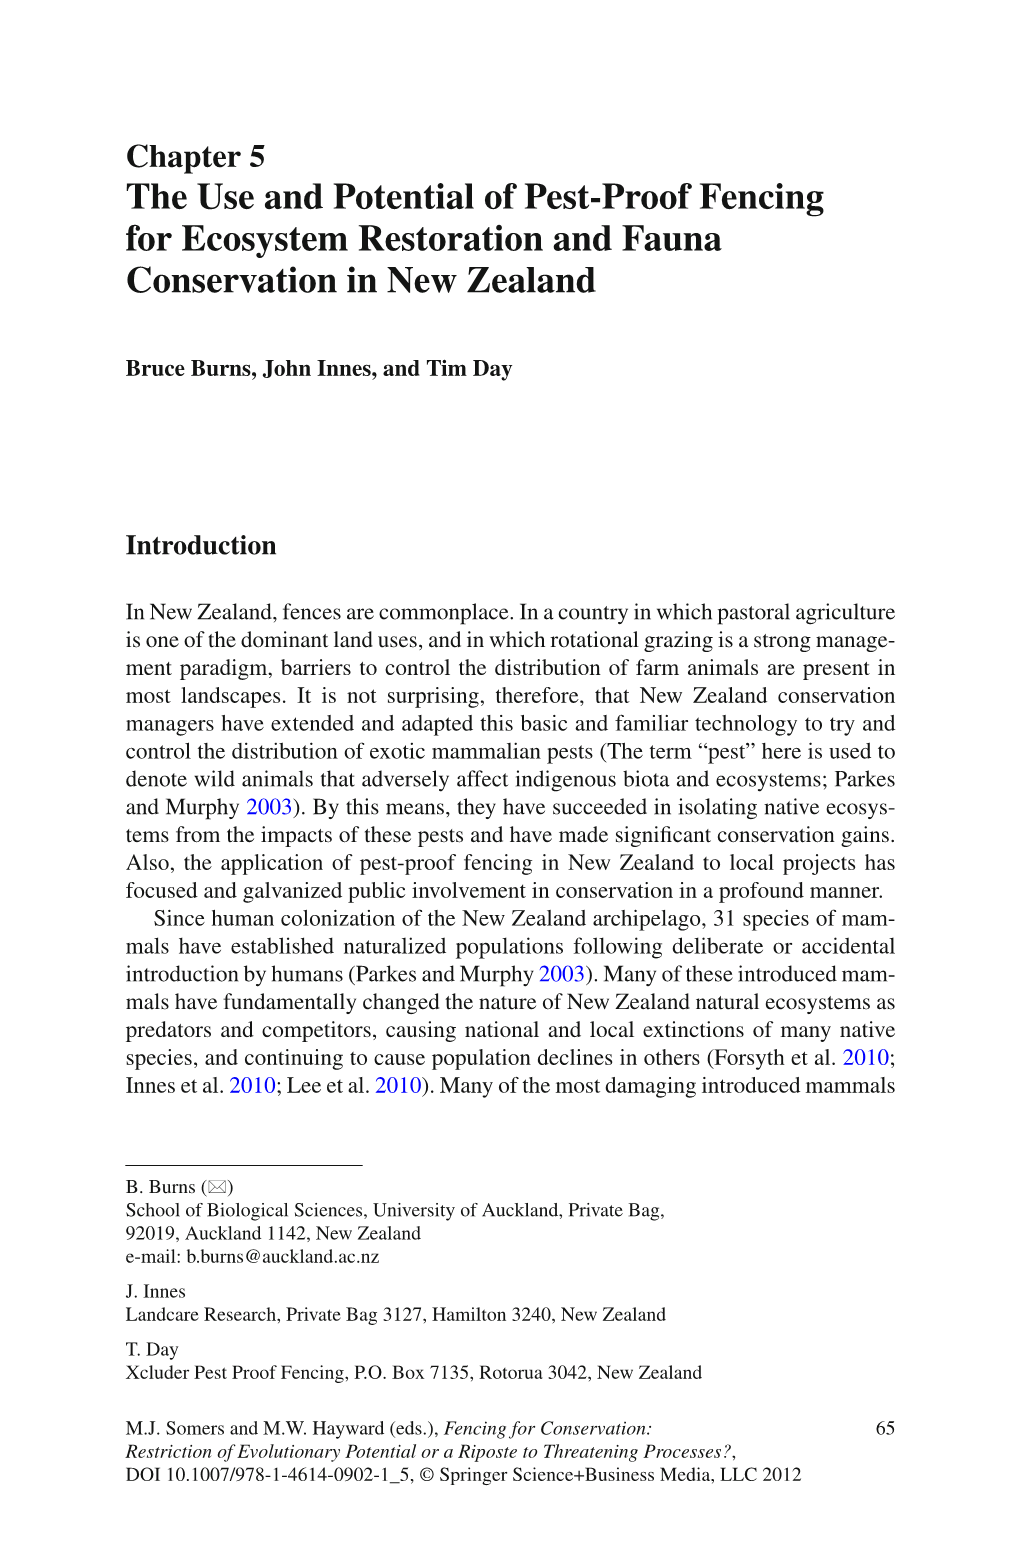 The Use and Potential of Pest-Proof Fencing for Ecosystem Restoration and Fauna Conservation in New Zealand